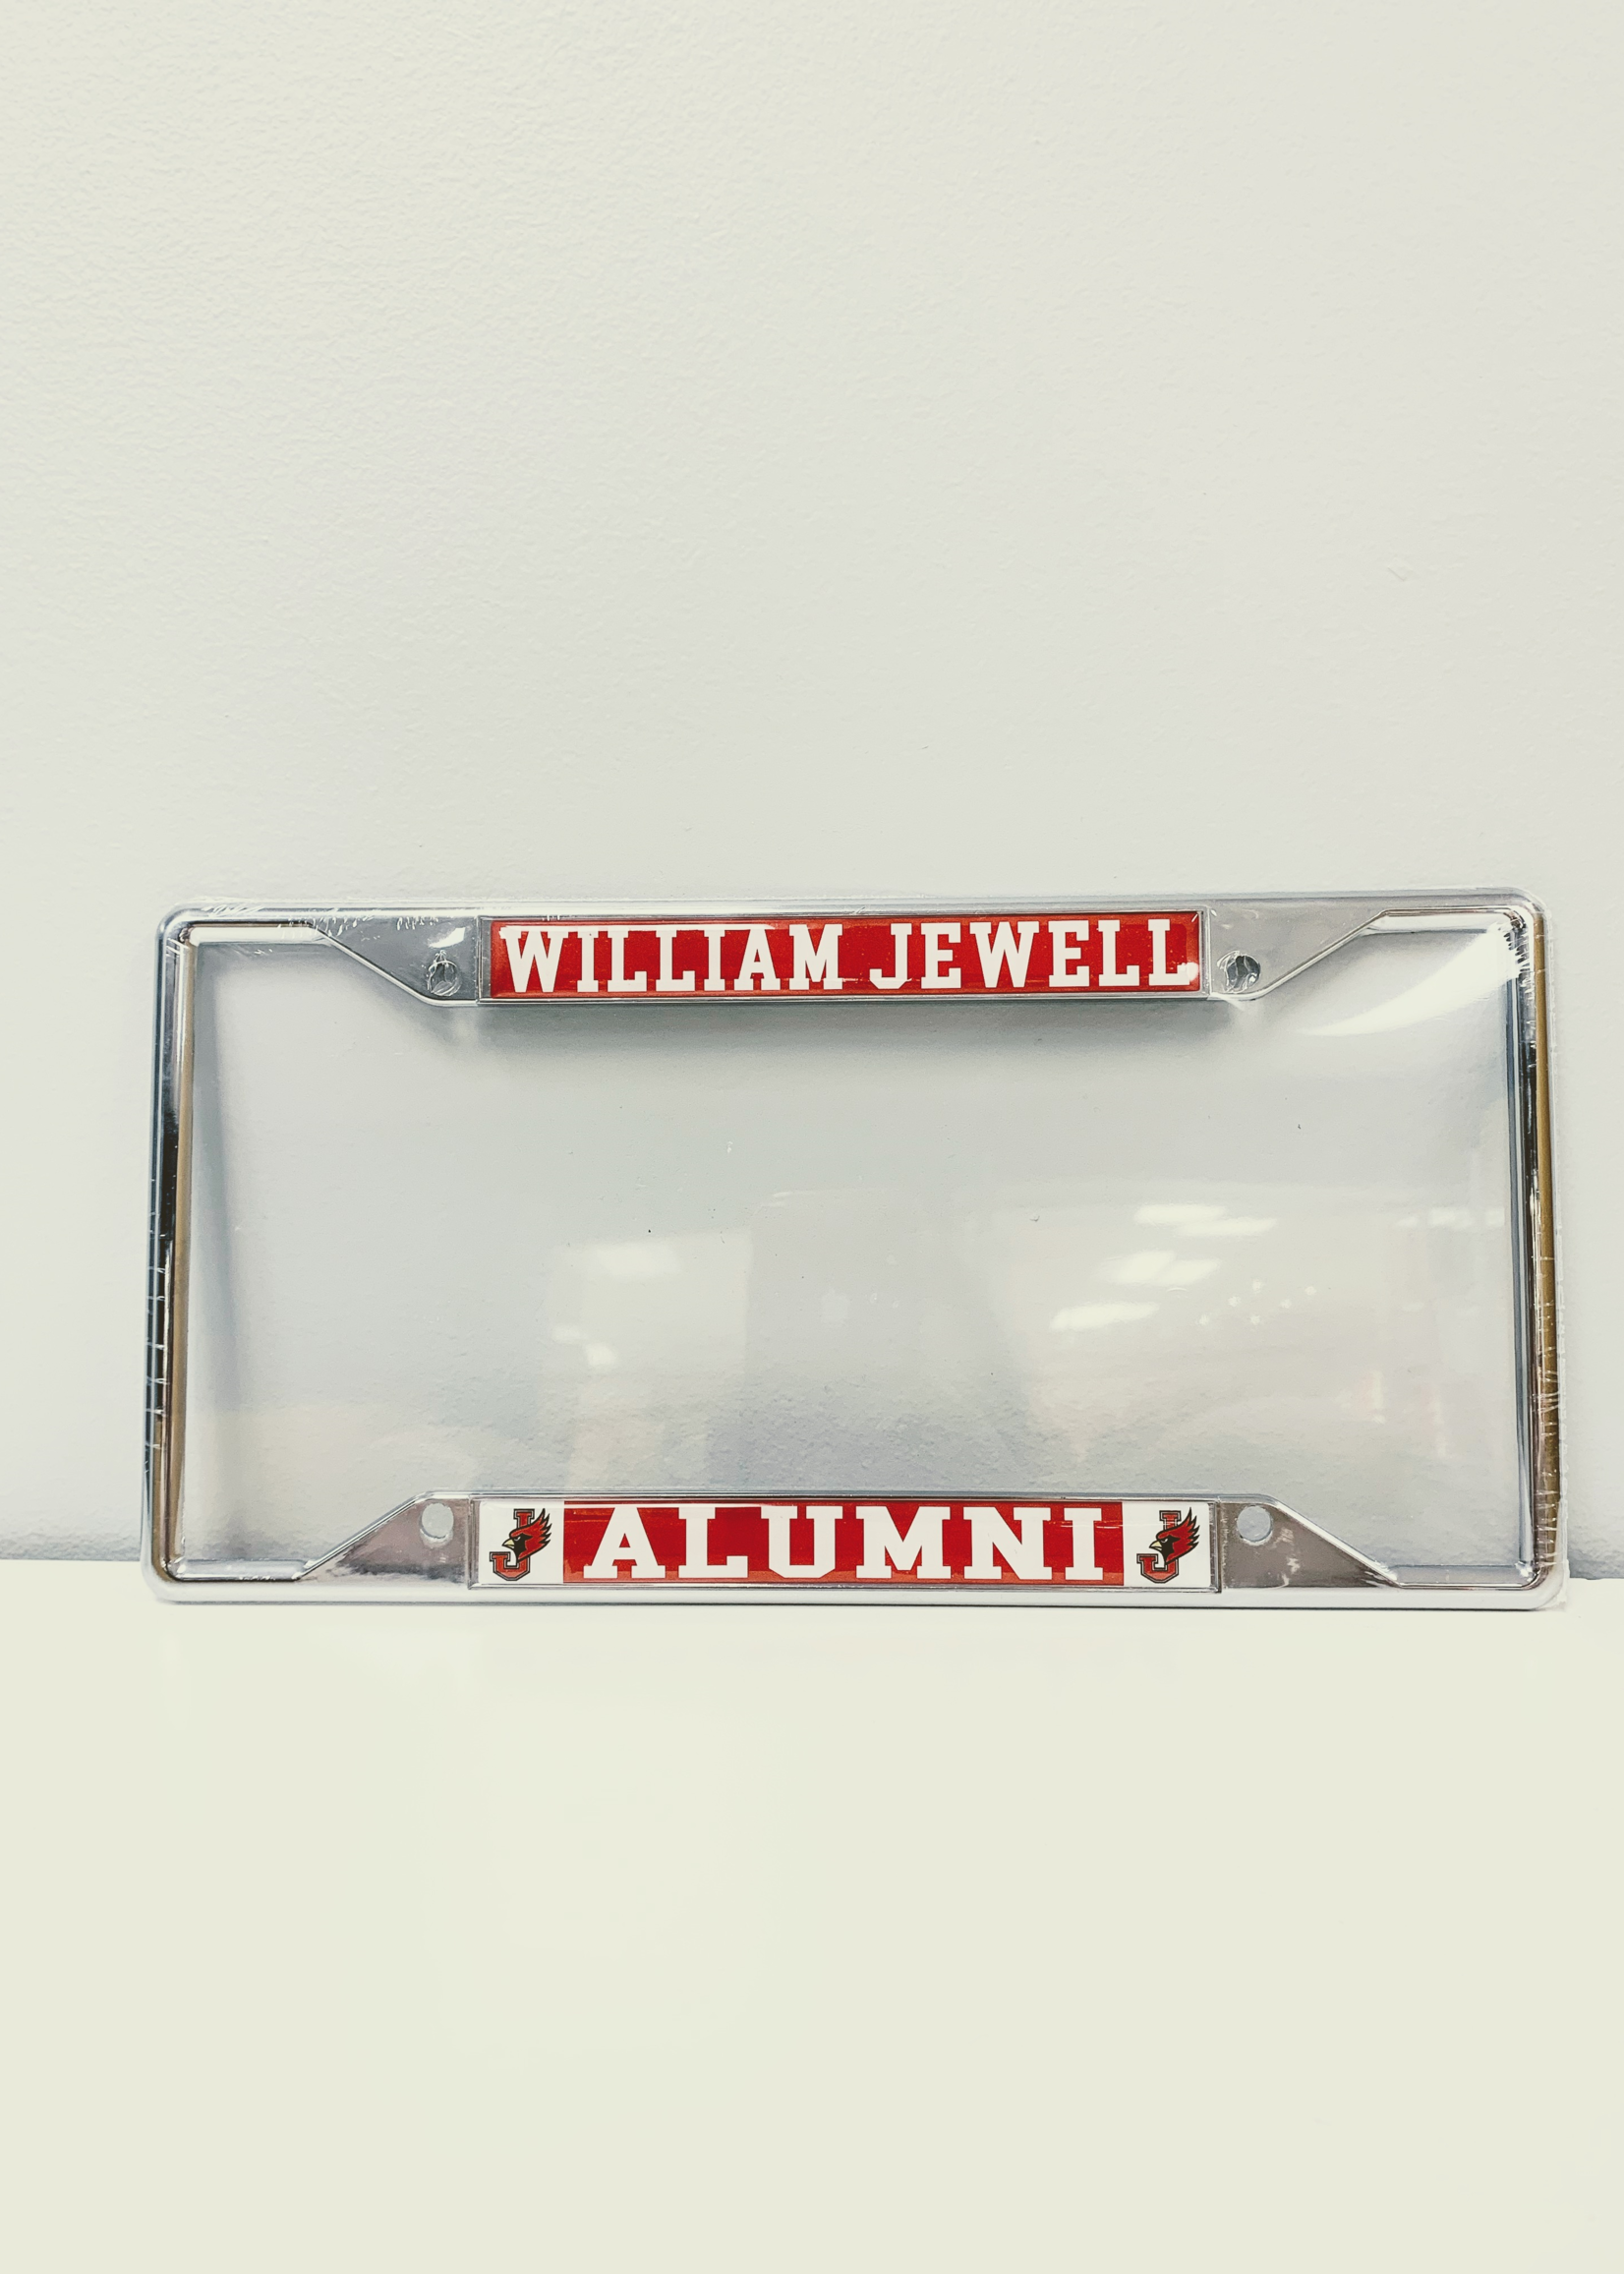 Jewell Alumni License Plate Frame Silver & Red